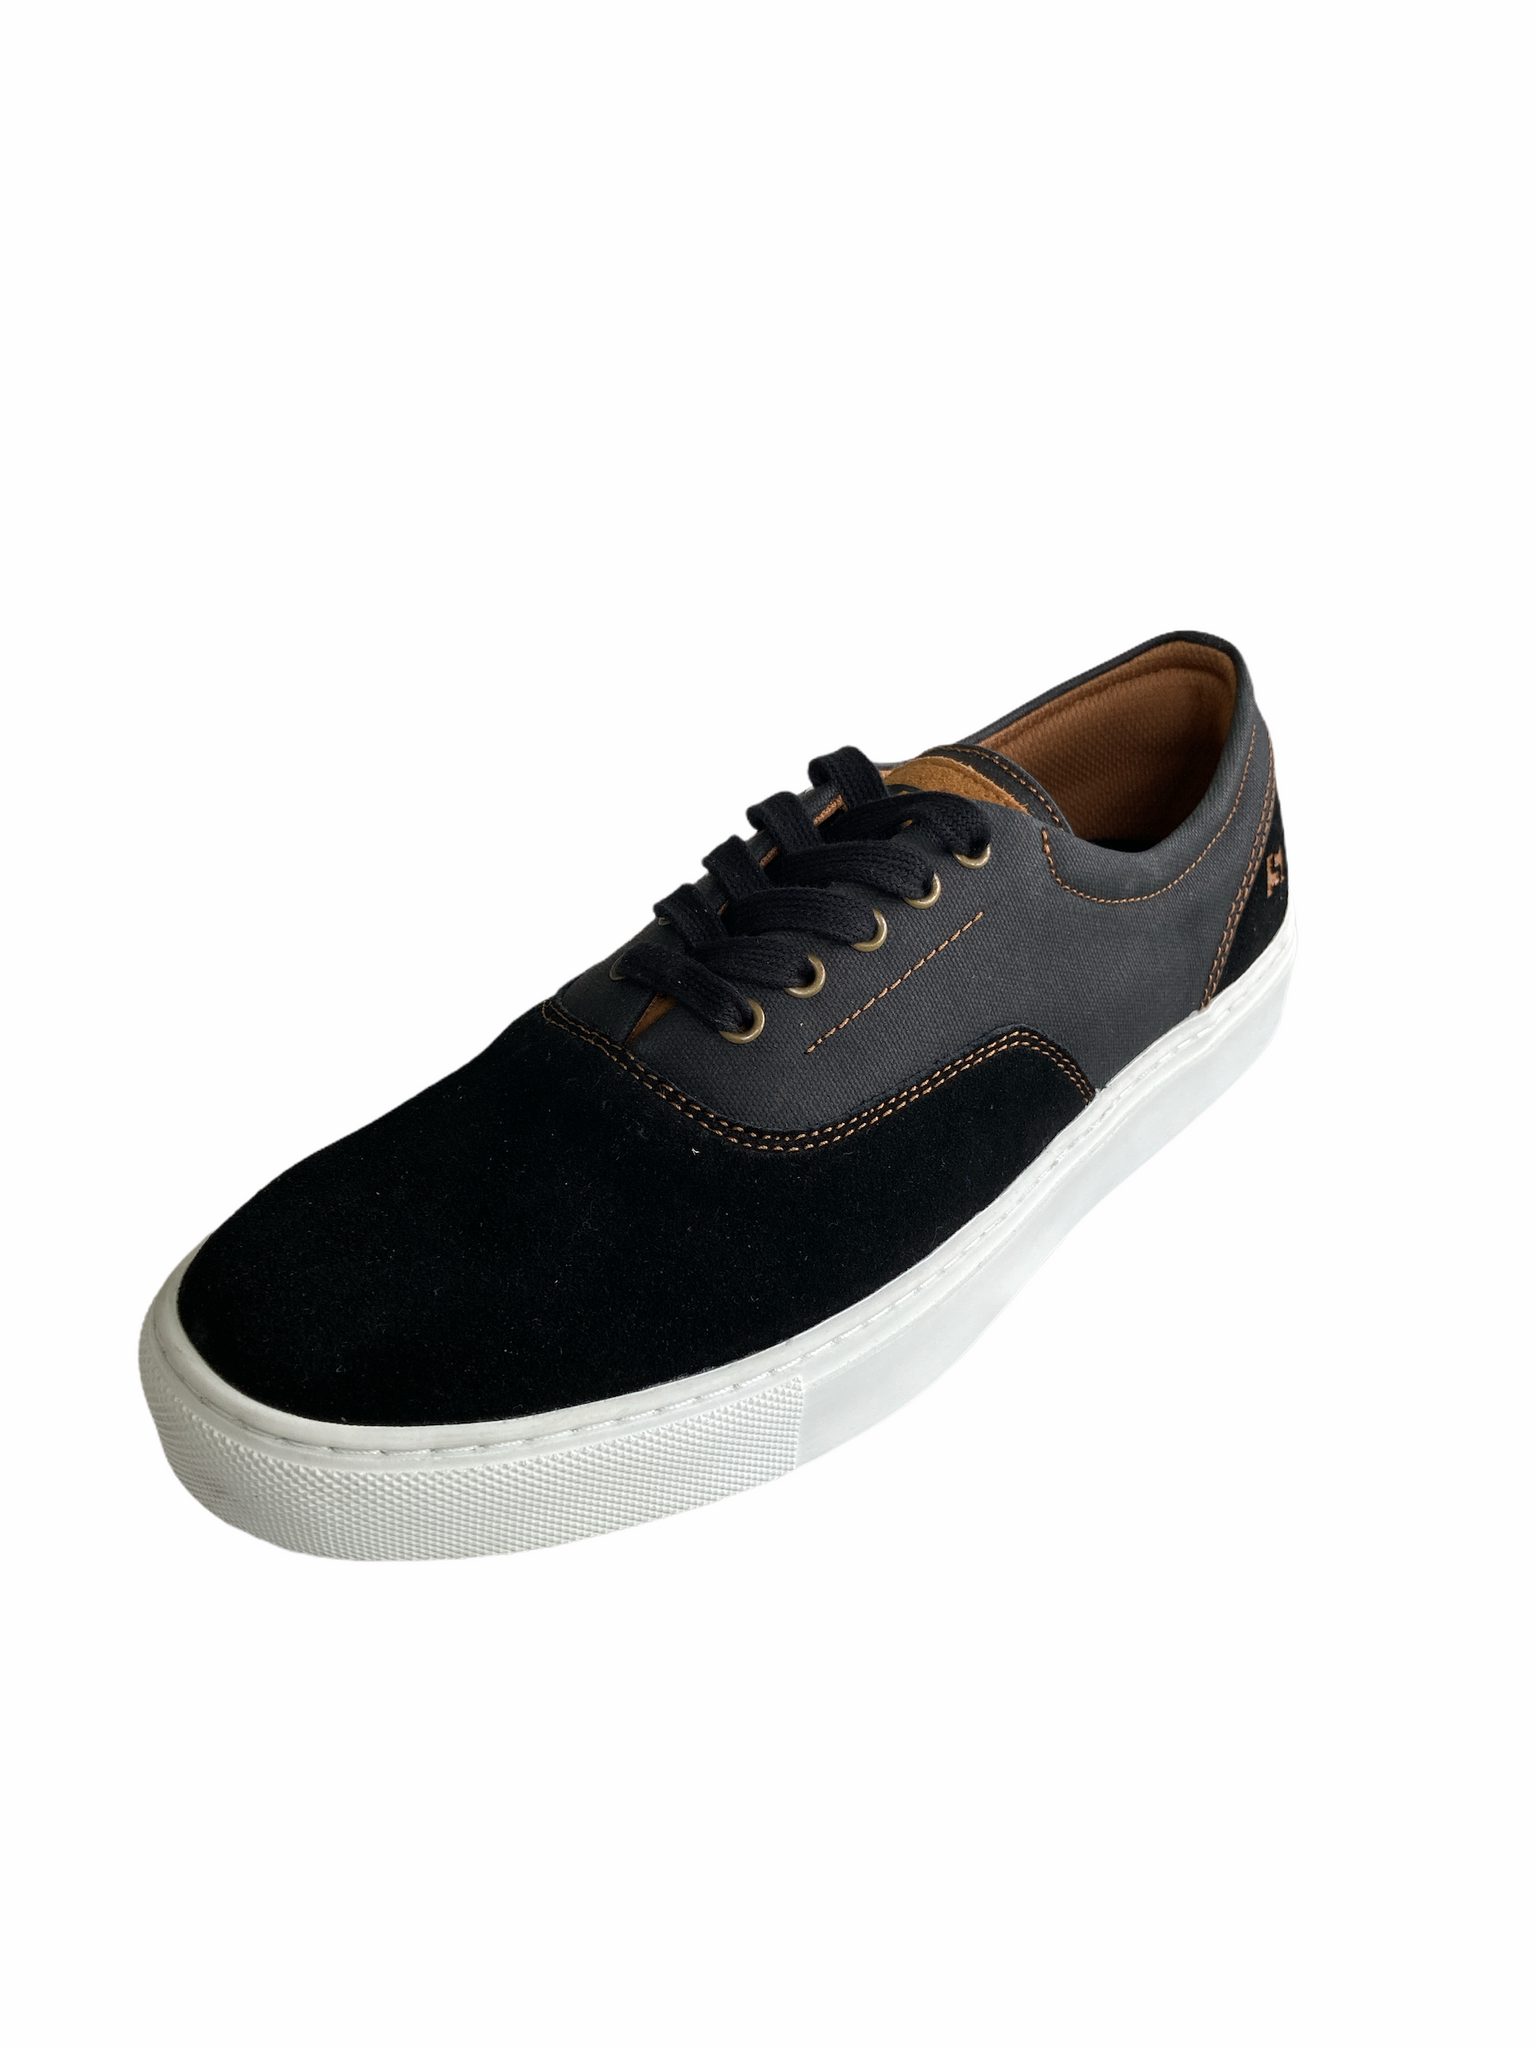 STATE FOOTWEAR PACIFIC CUP BLACK/WHT